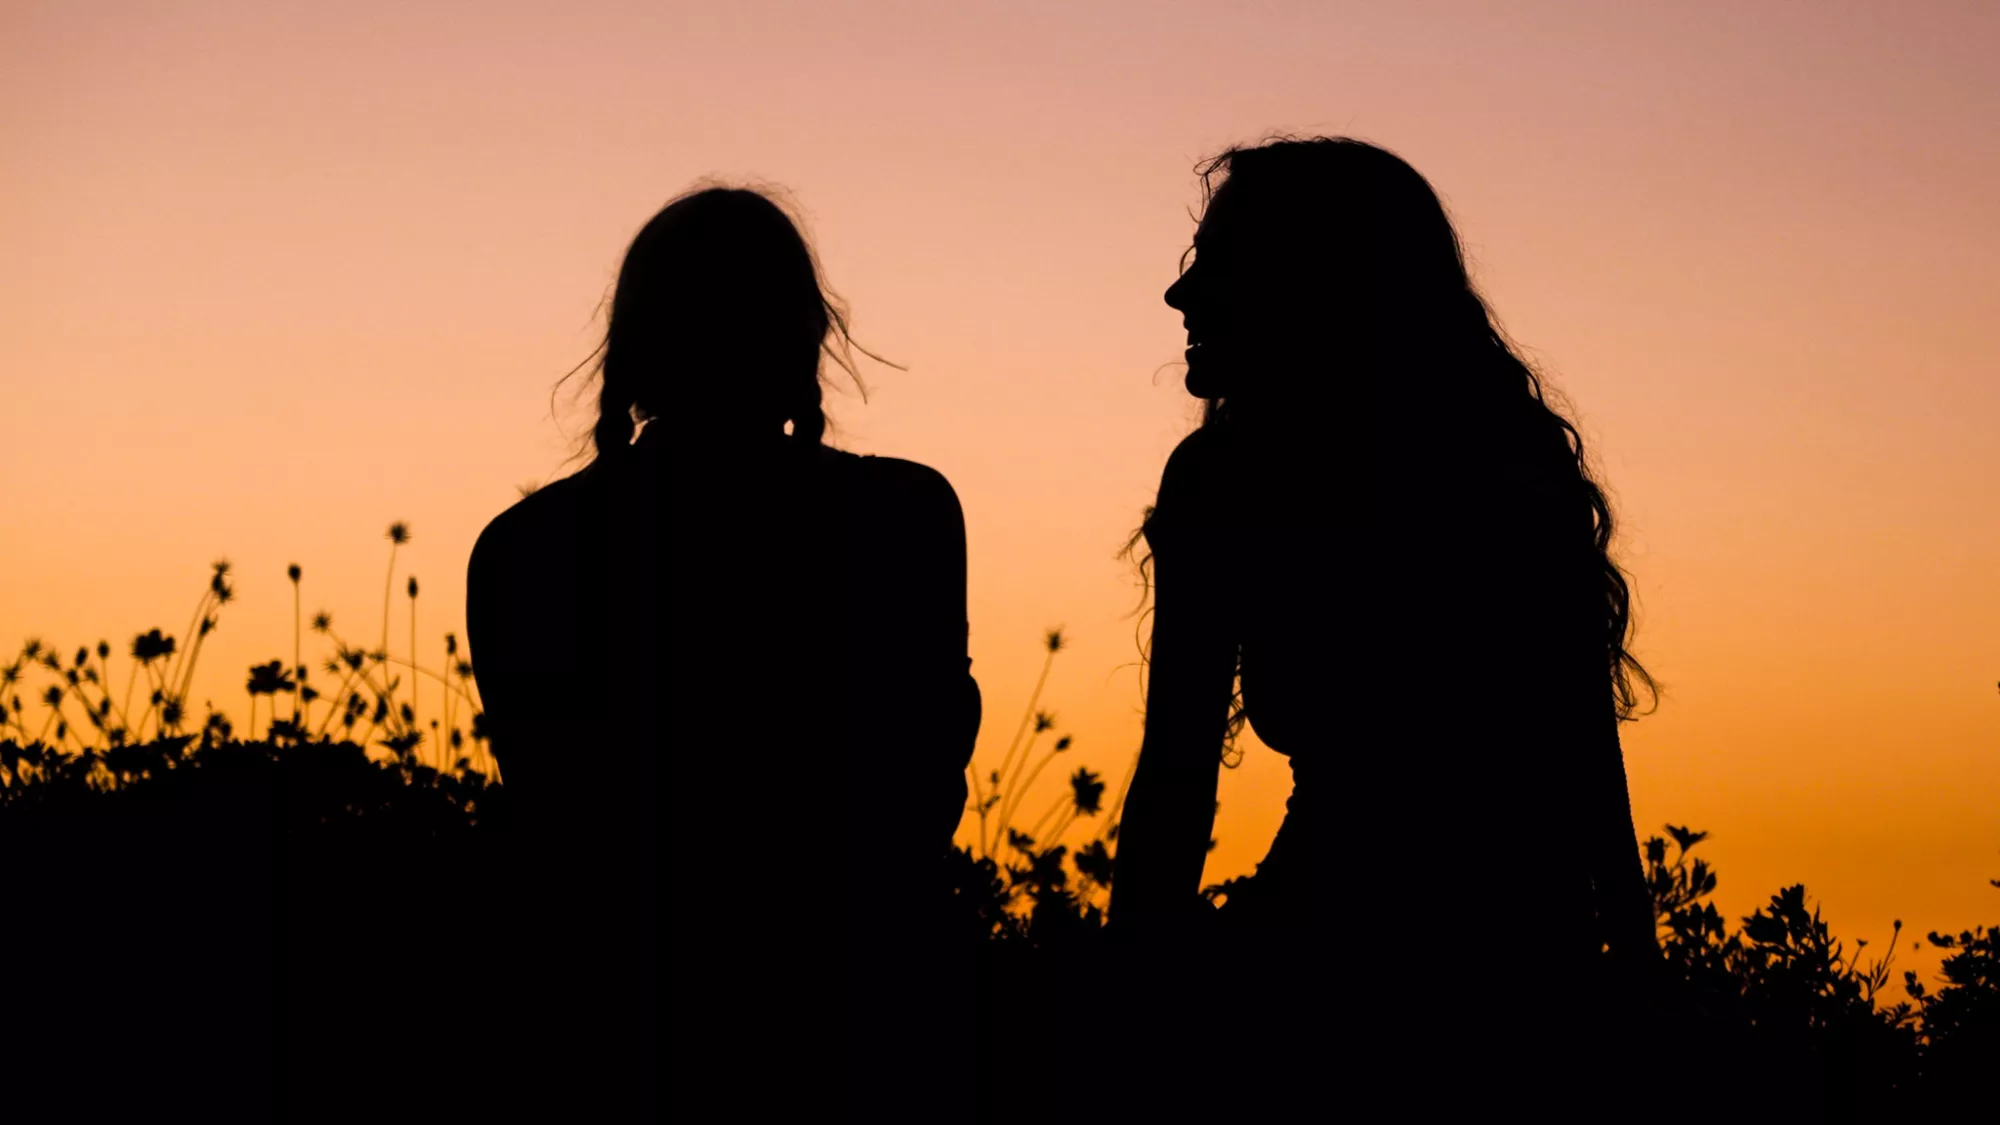 Two people with long hair talking, silhouetted by a sunset